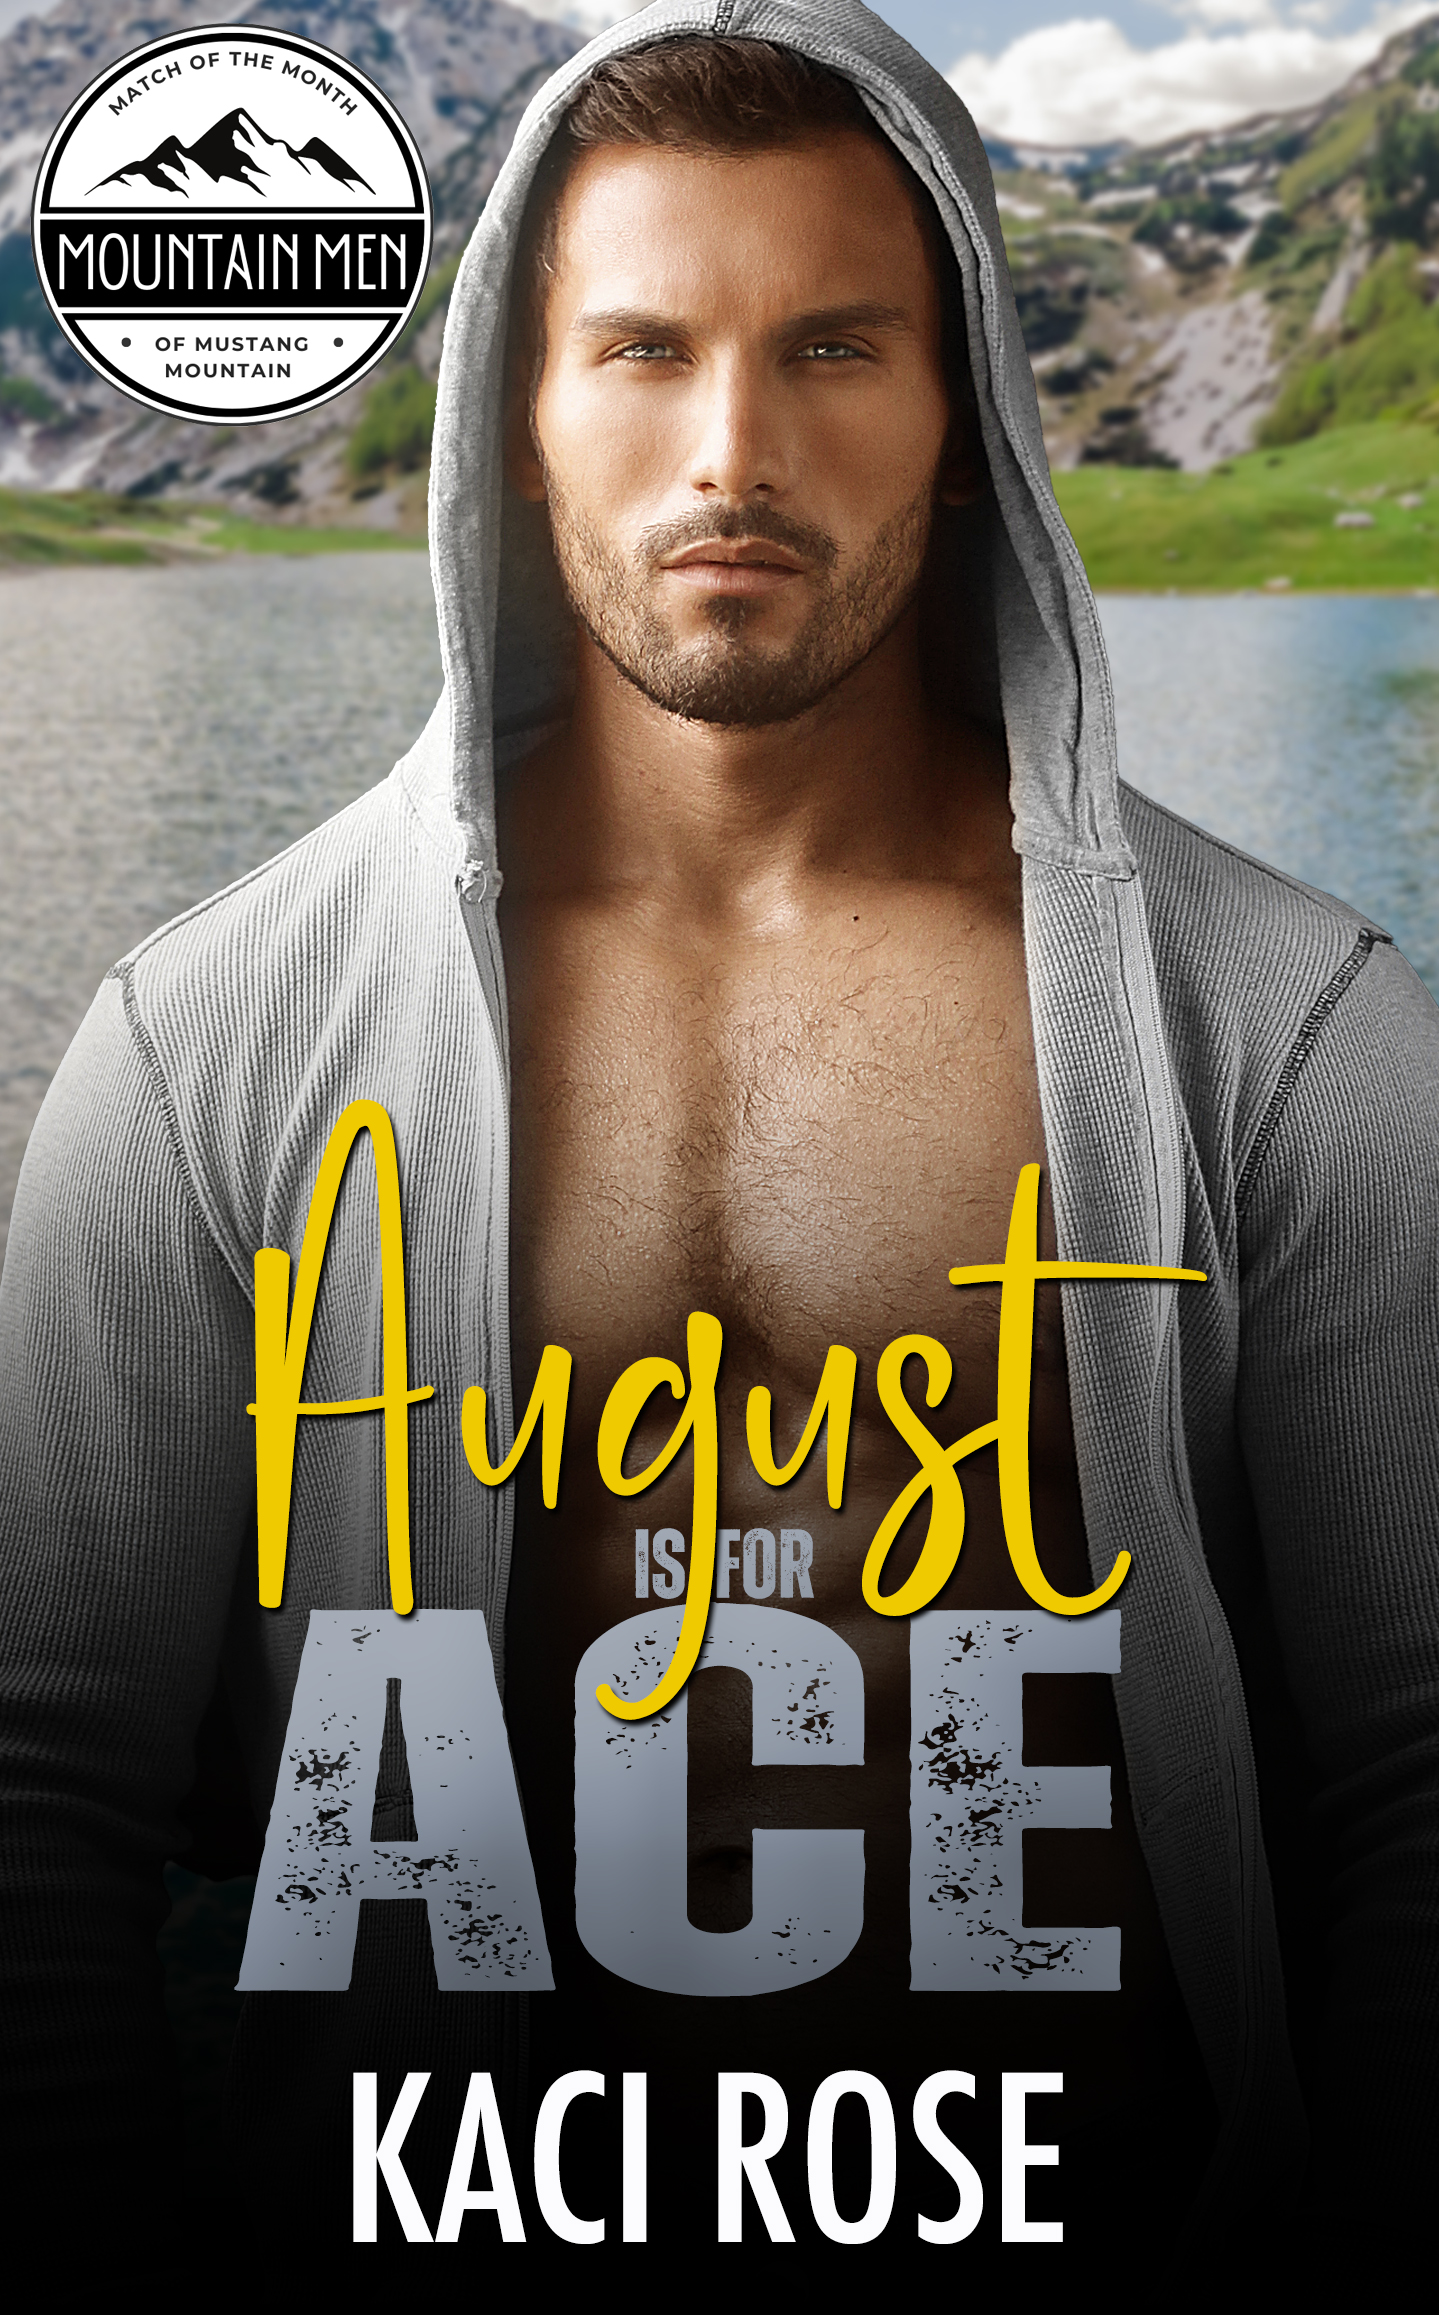 8. August_Ace